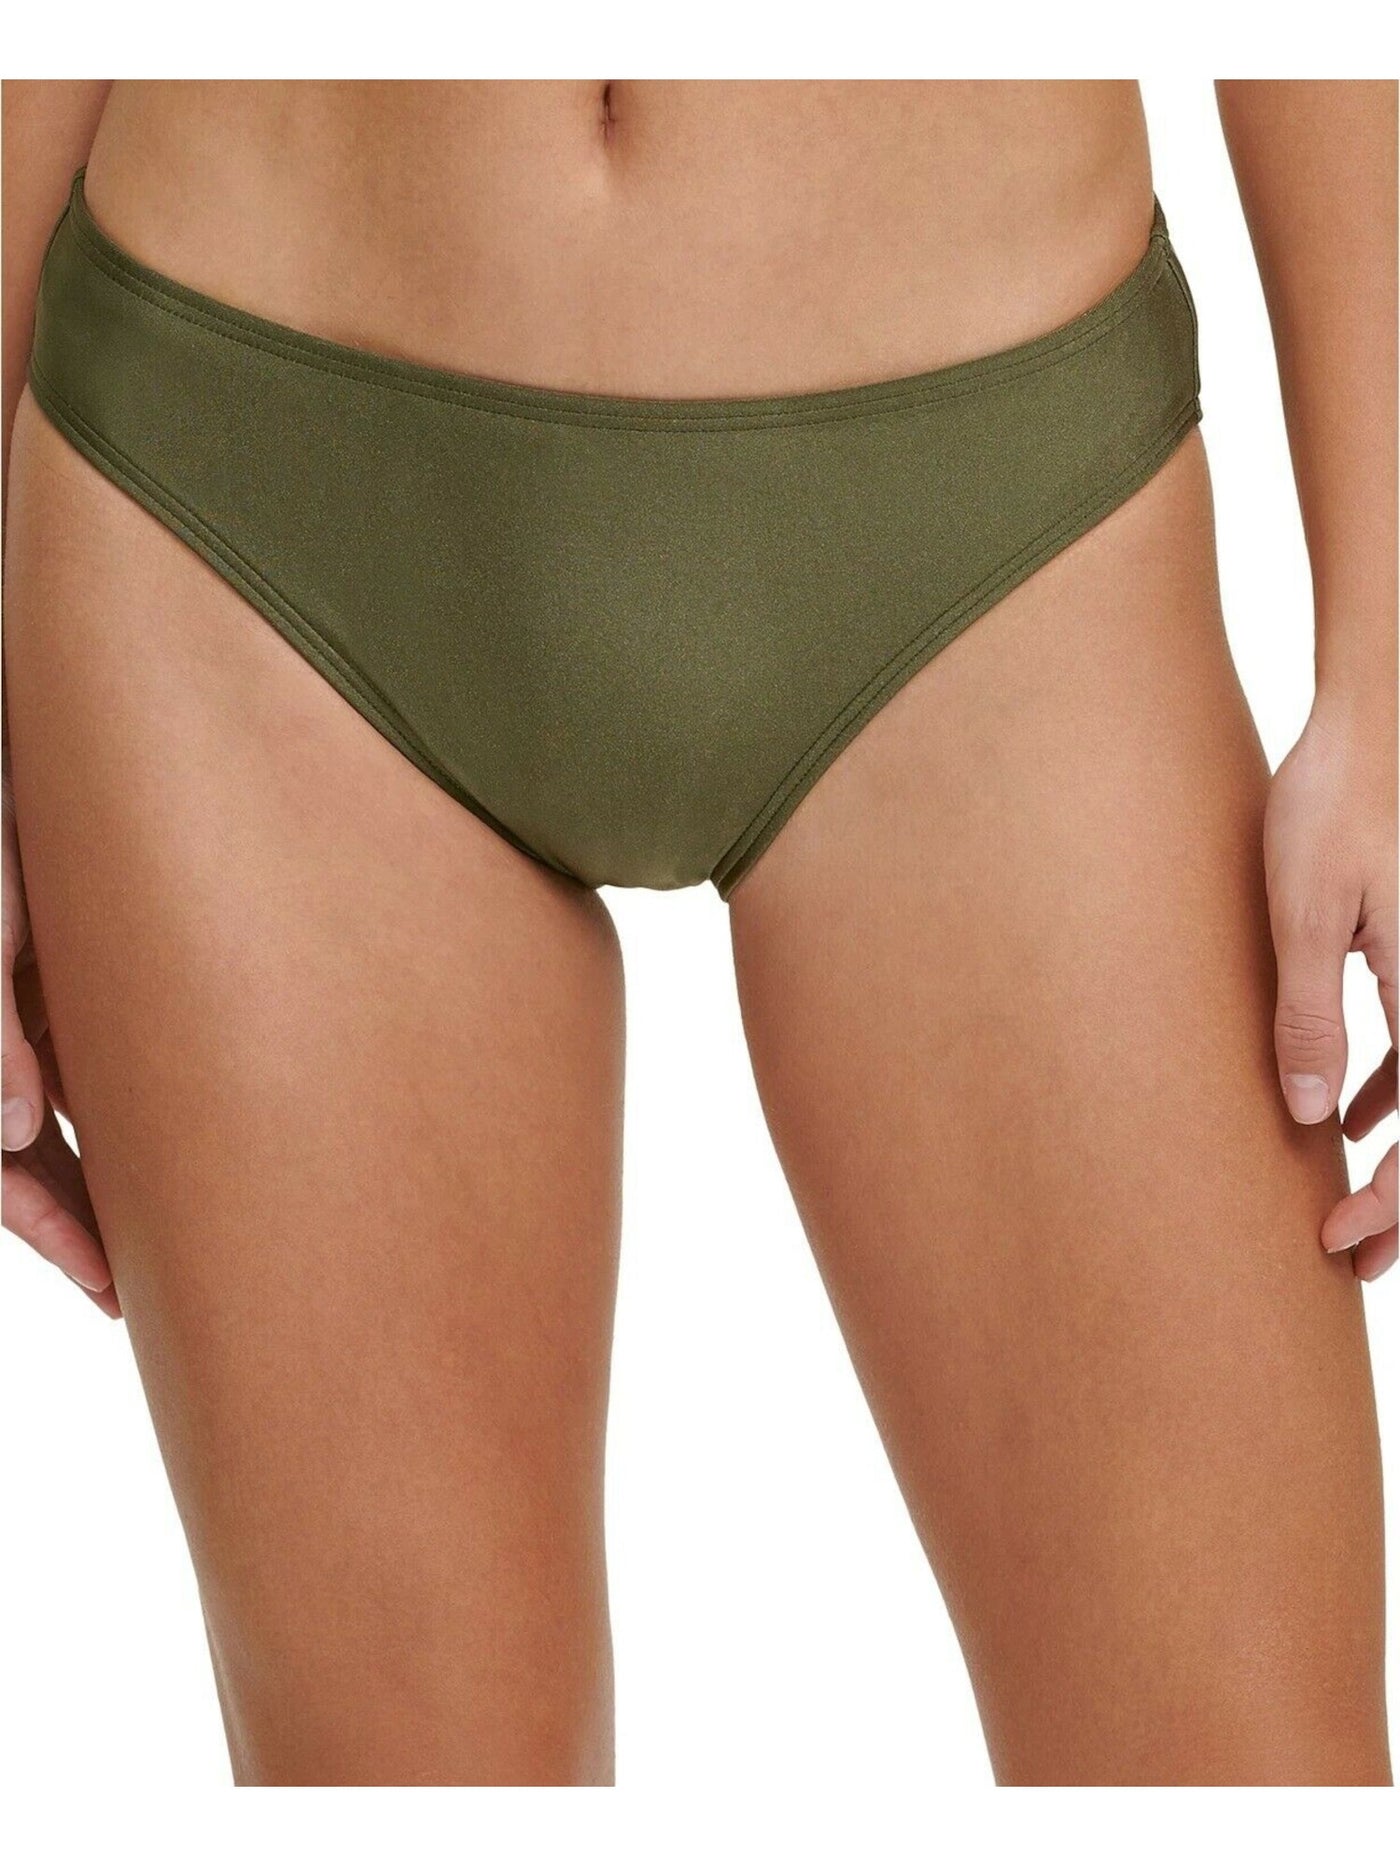 DKNY Women's Green Stretch Low-Rise Bikini Lined Full Coverage Classic Scoop Swimsuit Bottom L